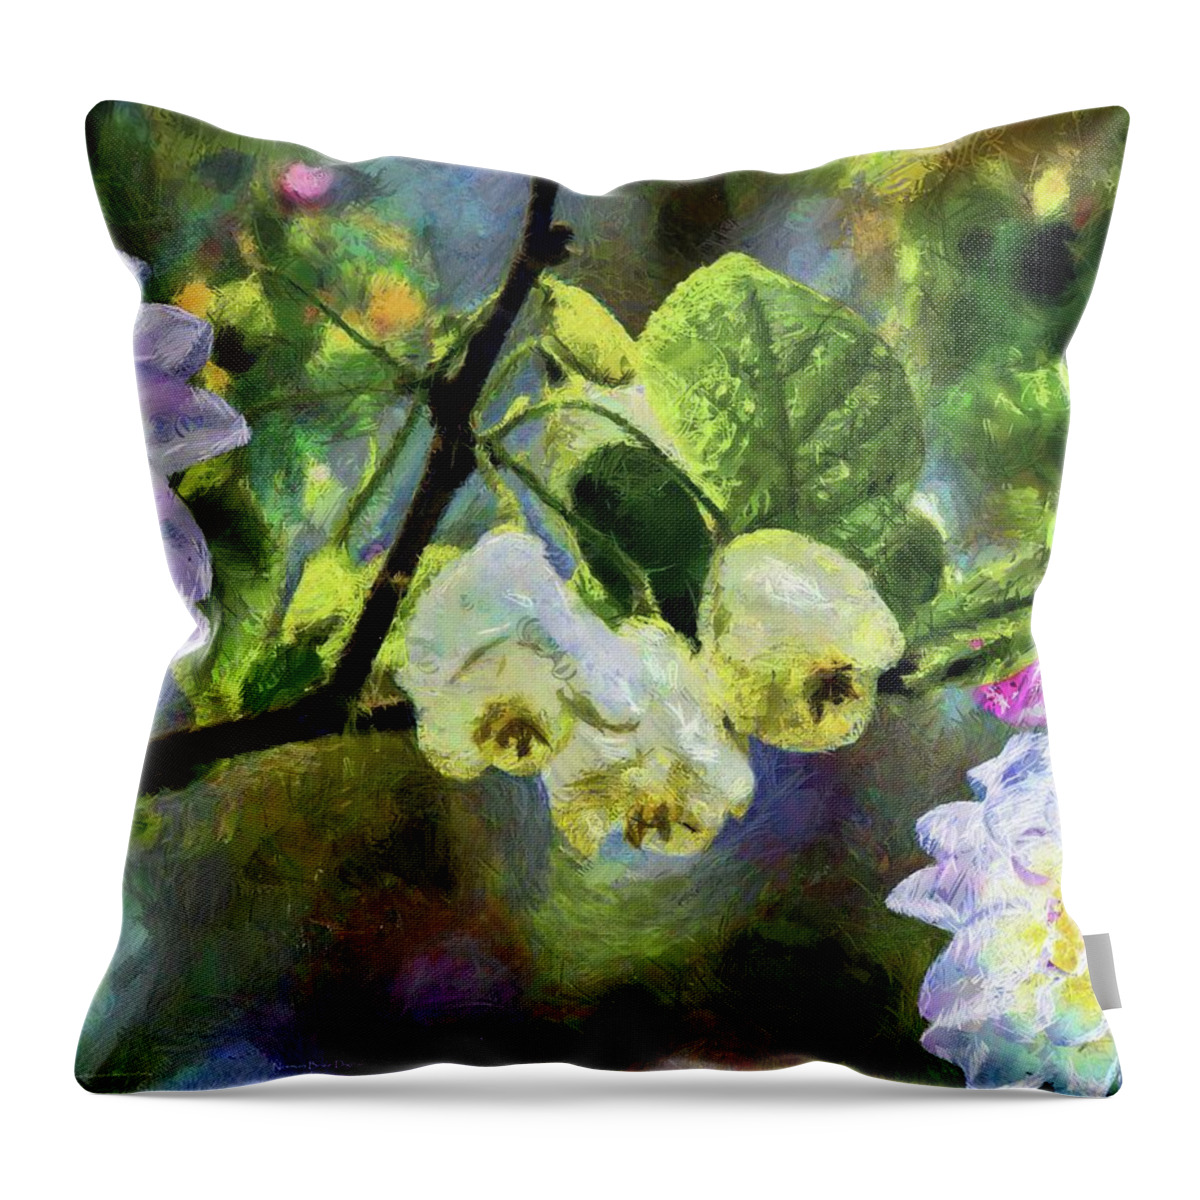 Vibrant Throw Pillow featuring the digital art Painted Flower by Norman Brule